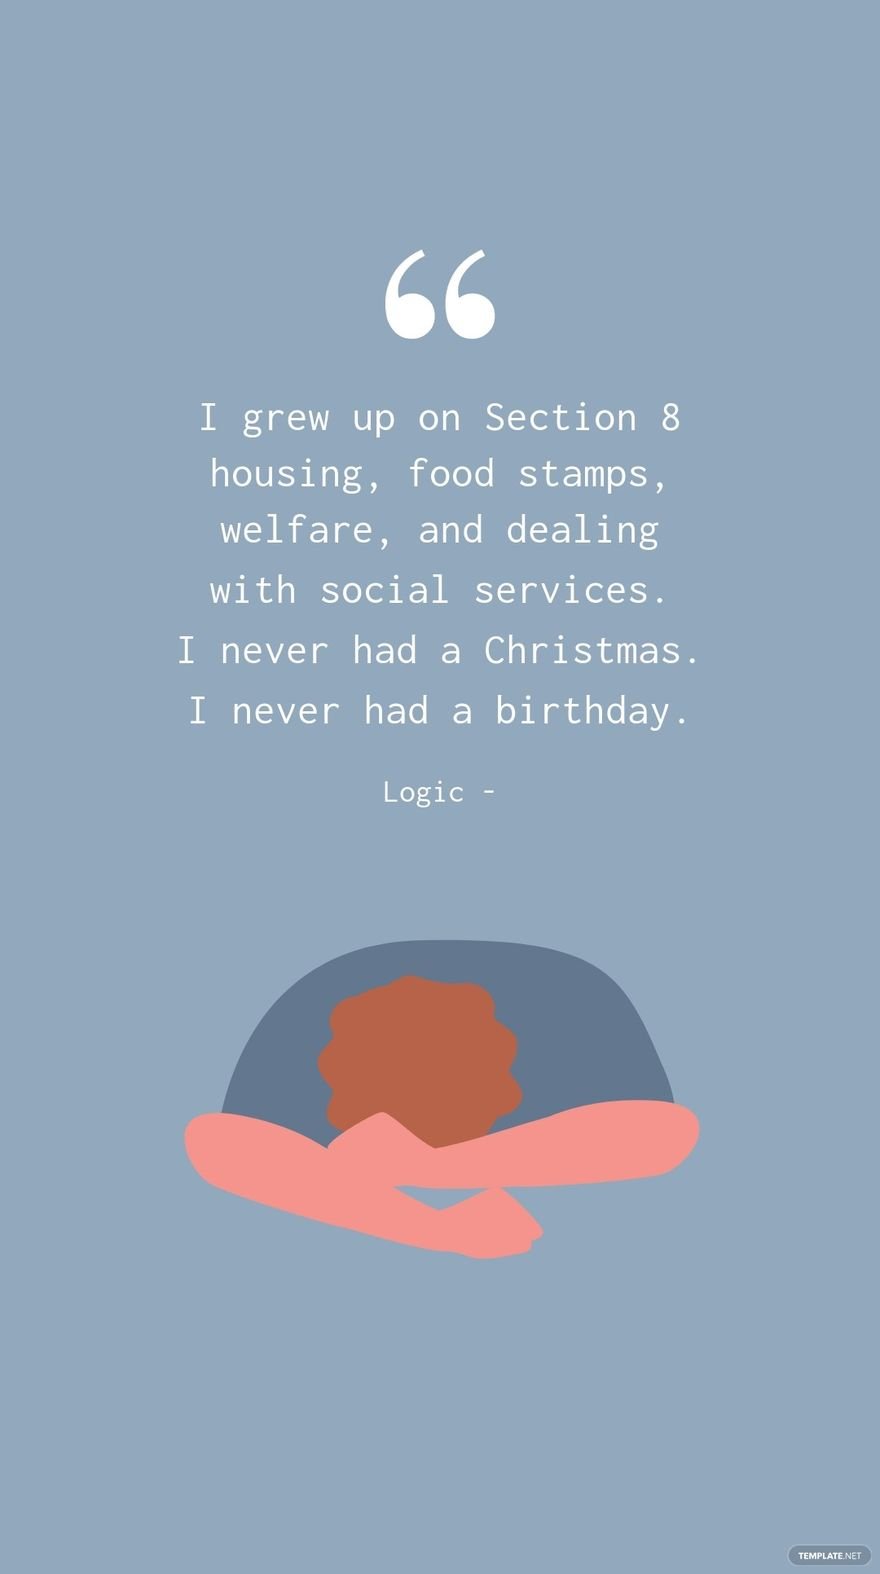 Logic - I grew up on Section 8 housing, food stamps, welfare, and dealing with social services. I never had a Christmas. I never had a birthday.